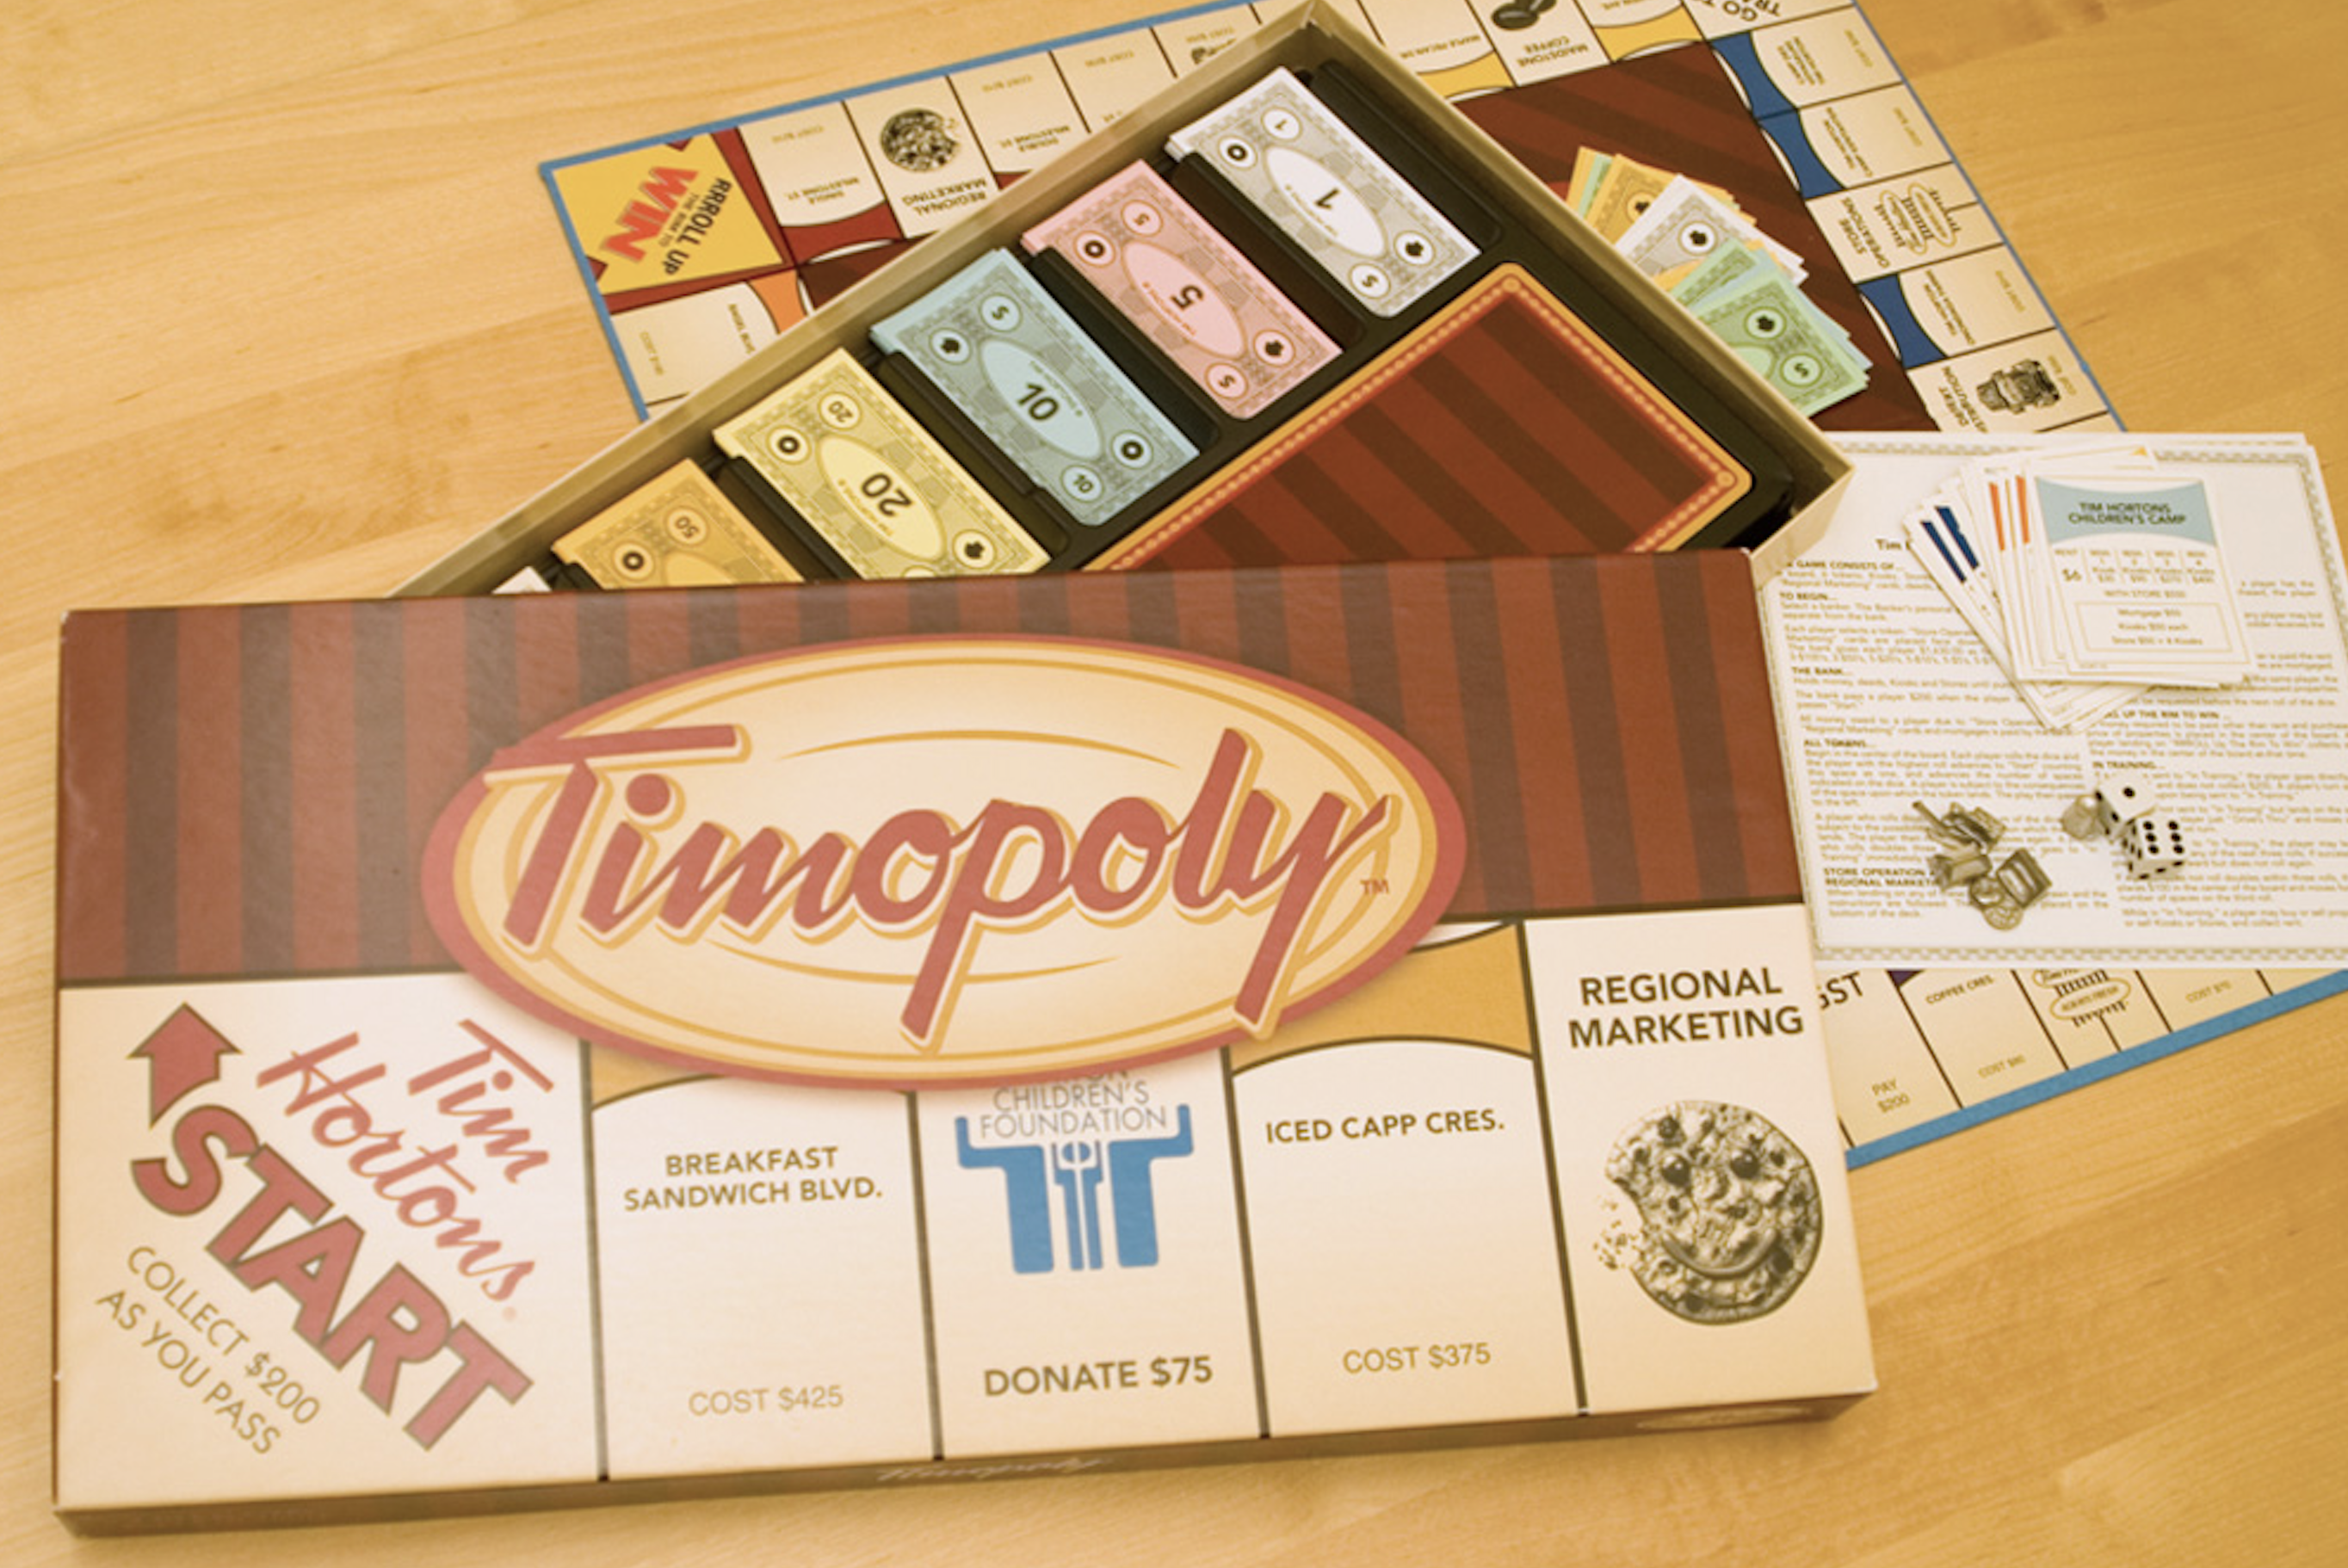 Timopoly board game | Product Design